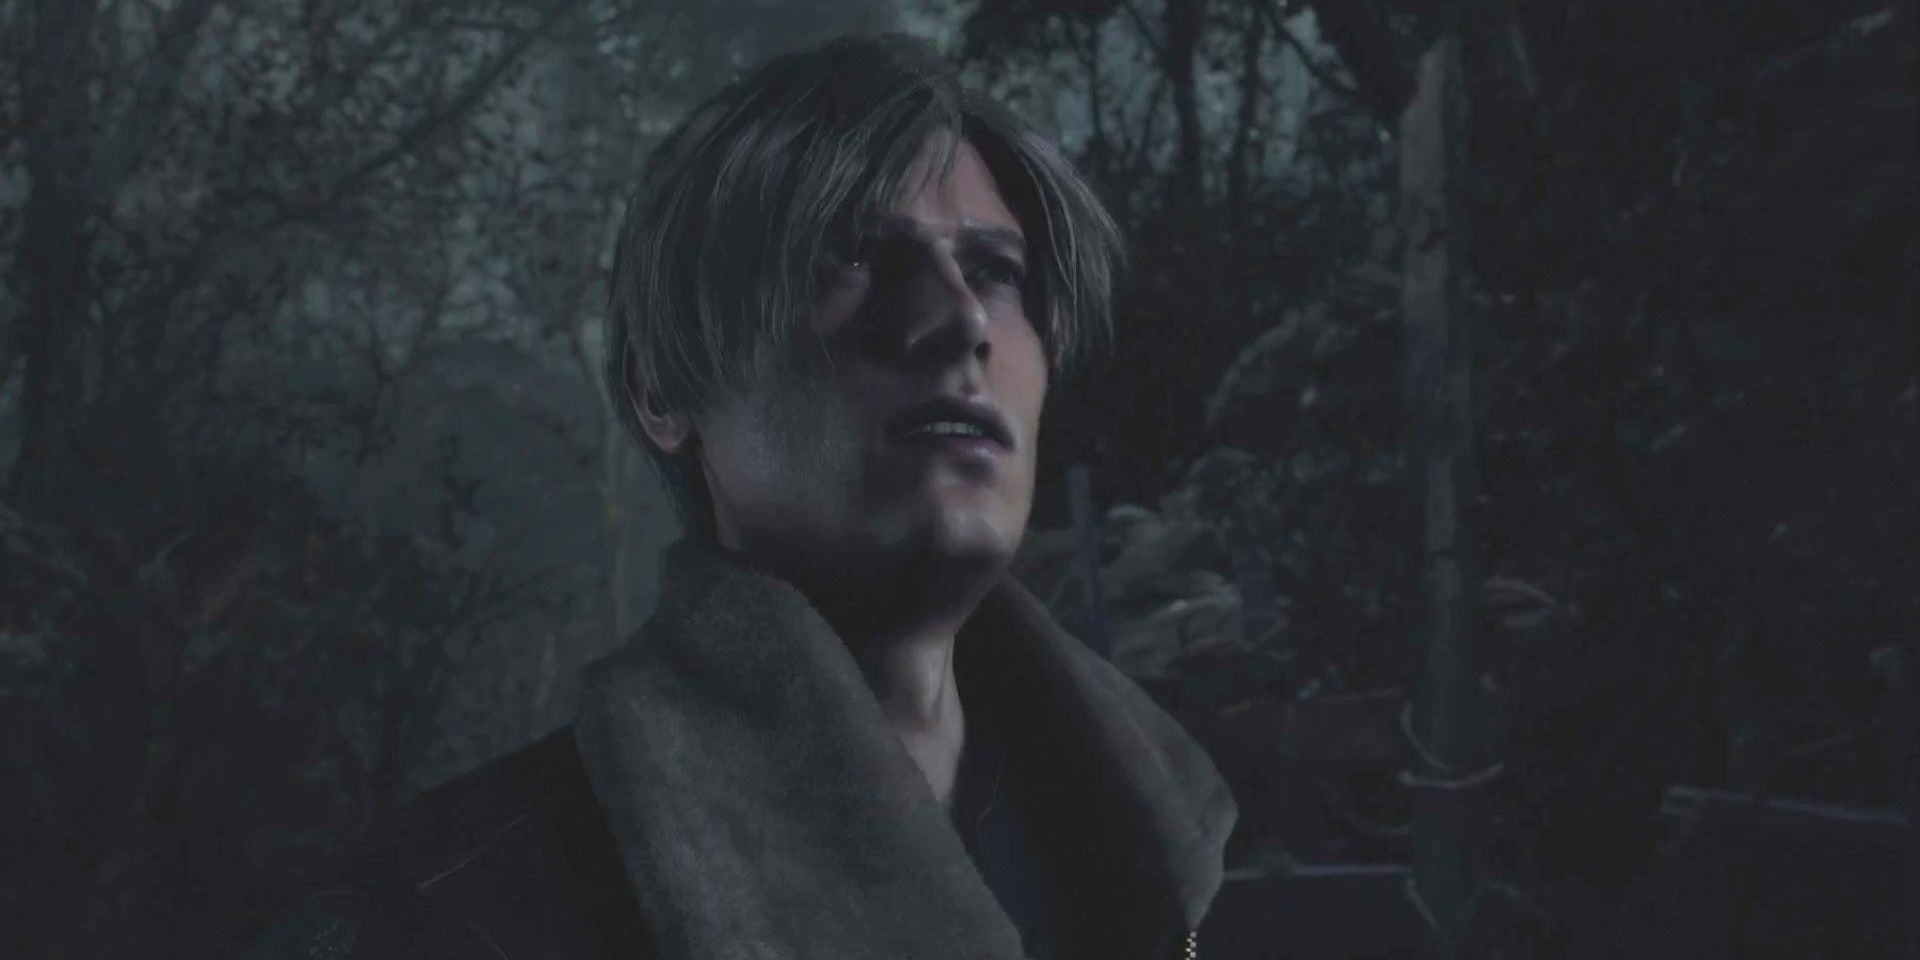 Is Resident Evil 4 on Game Pass?